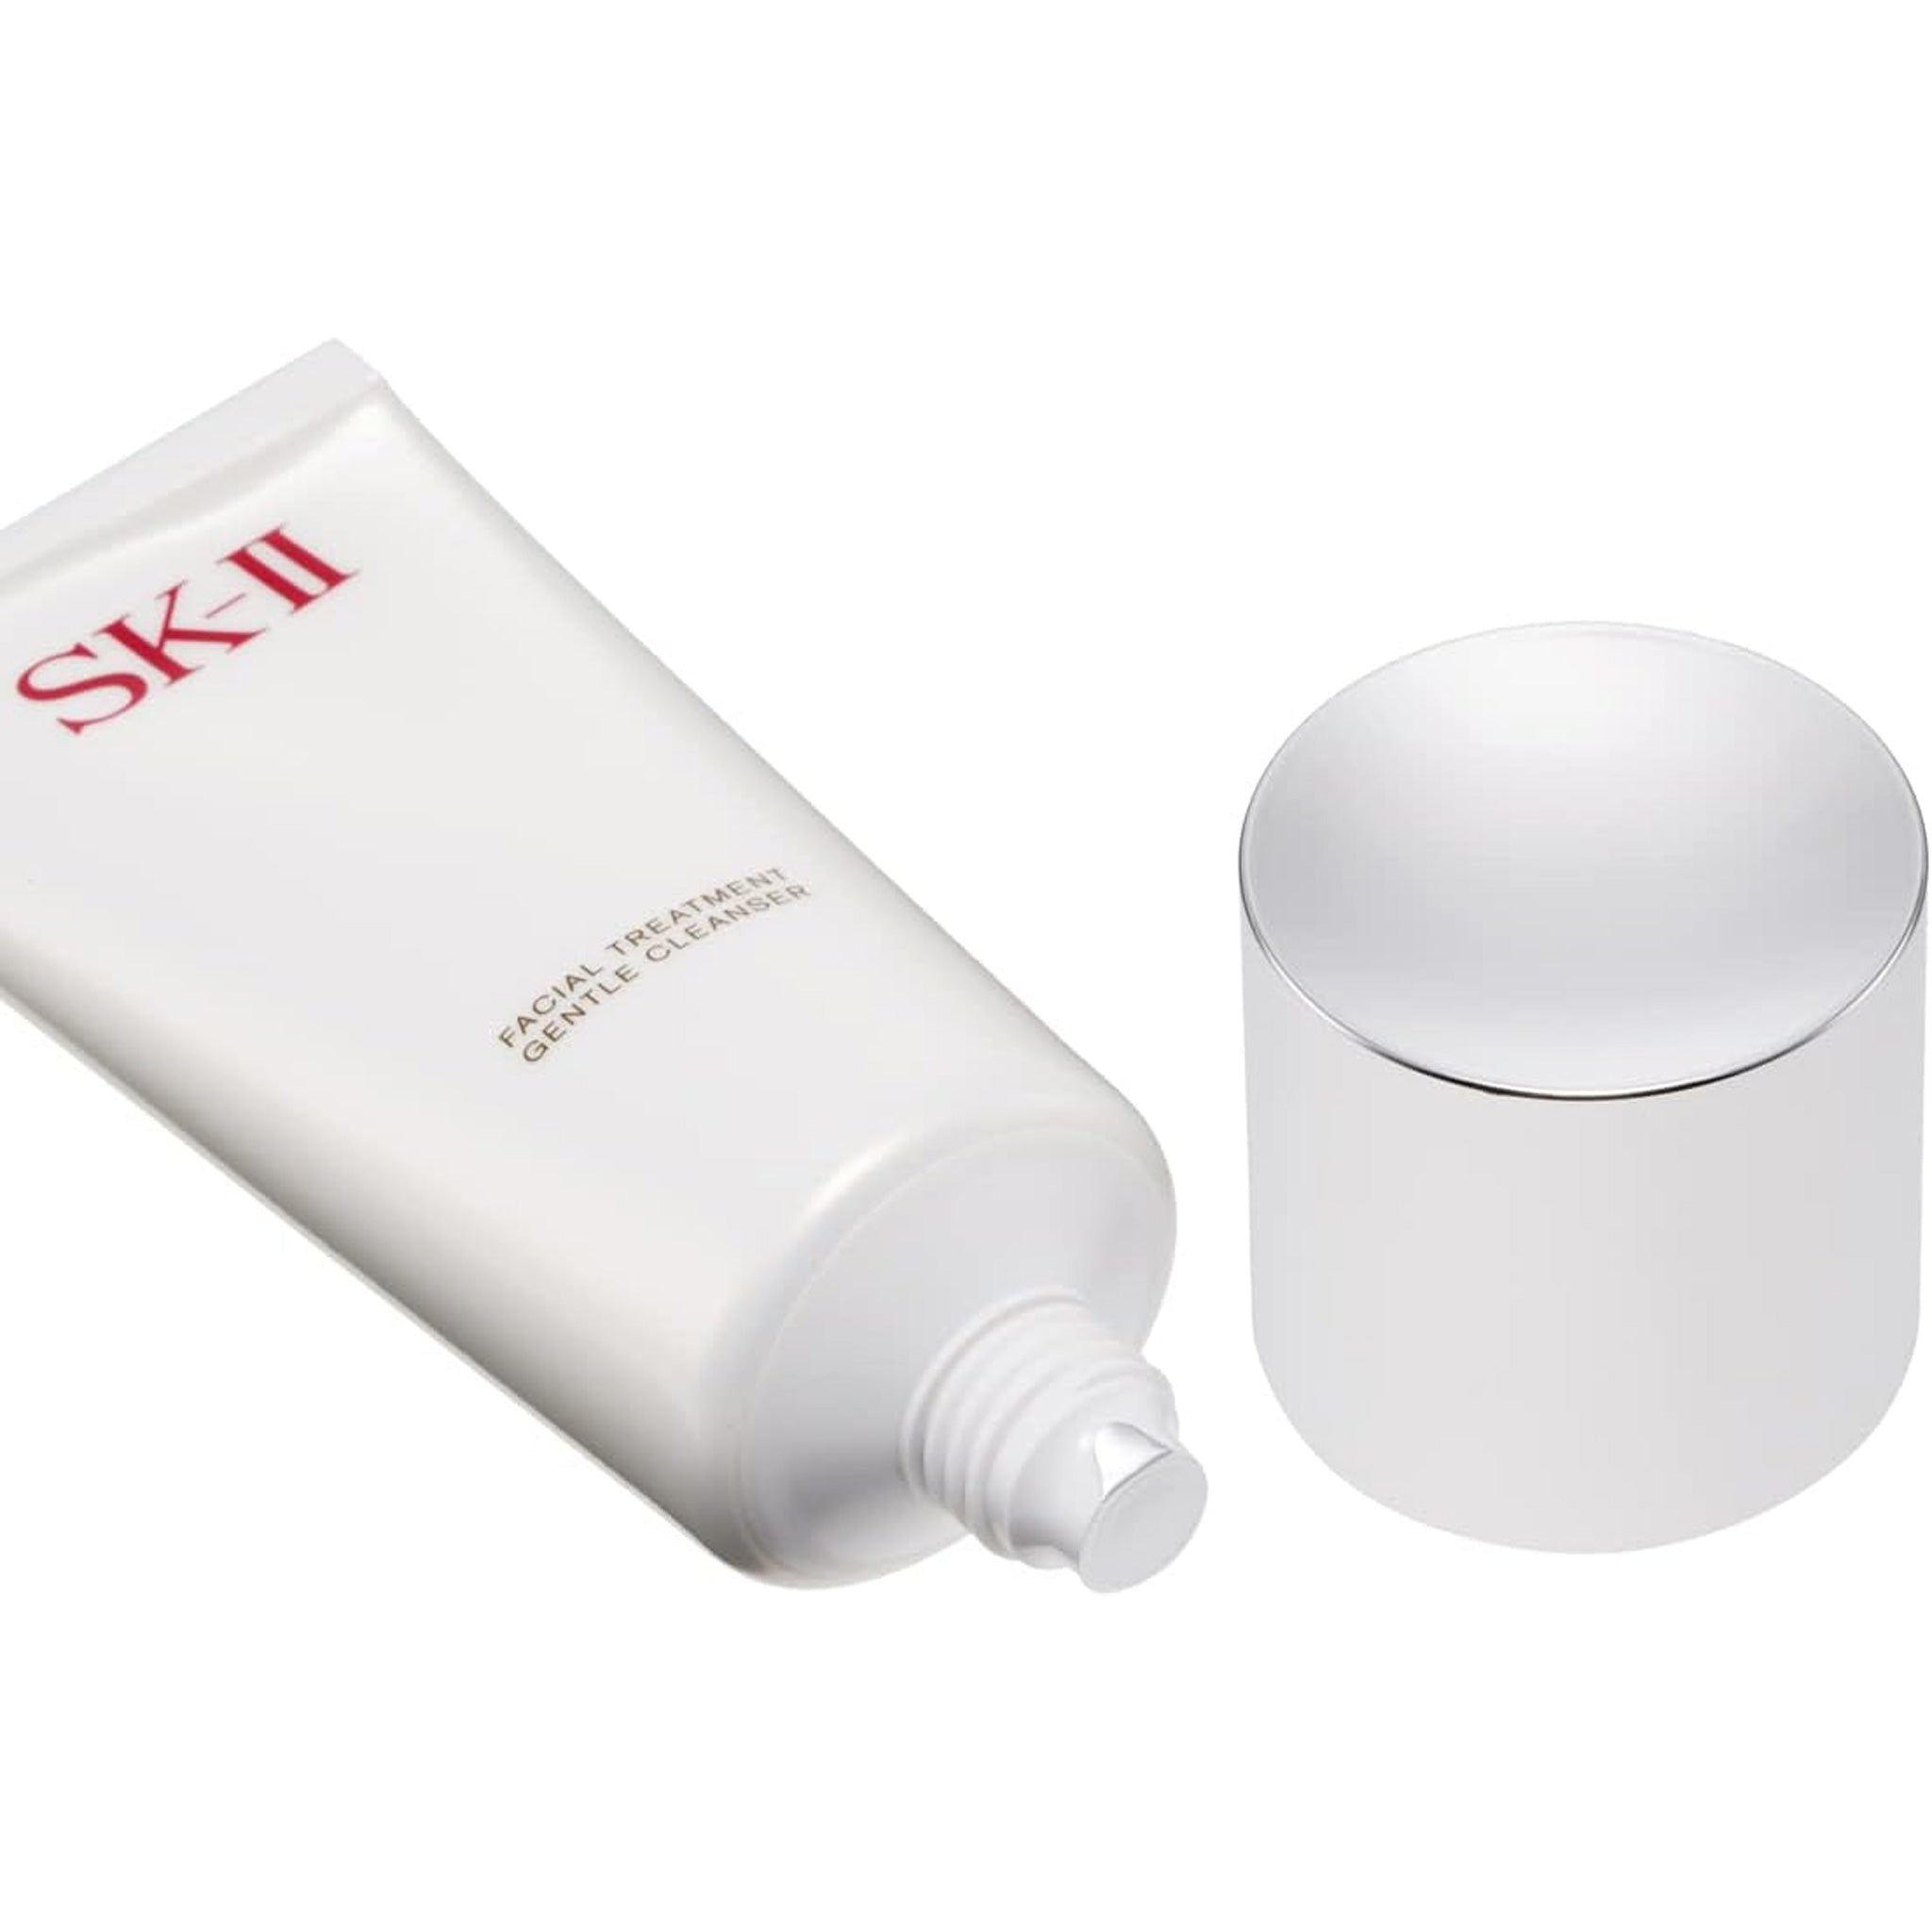 SK-II Facial Treatment Cleanser Daily Foaming Wash 120g